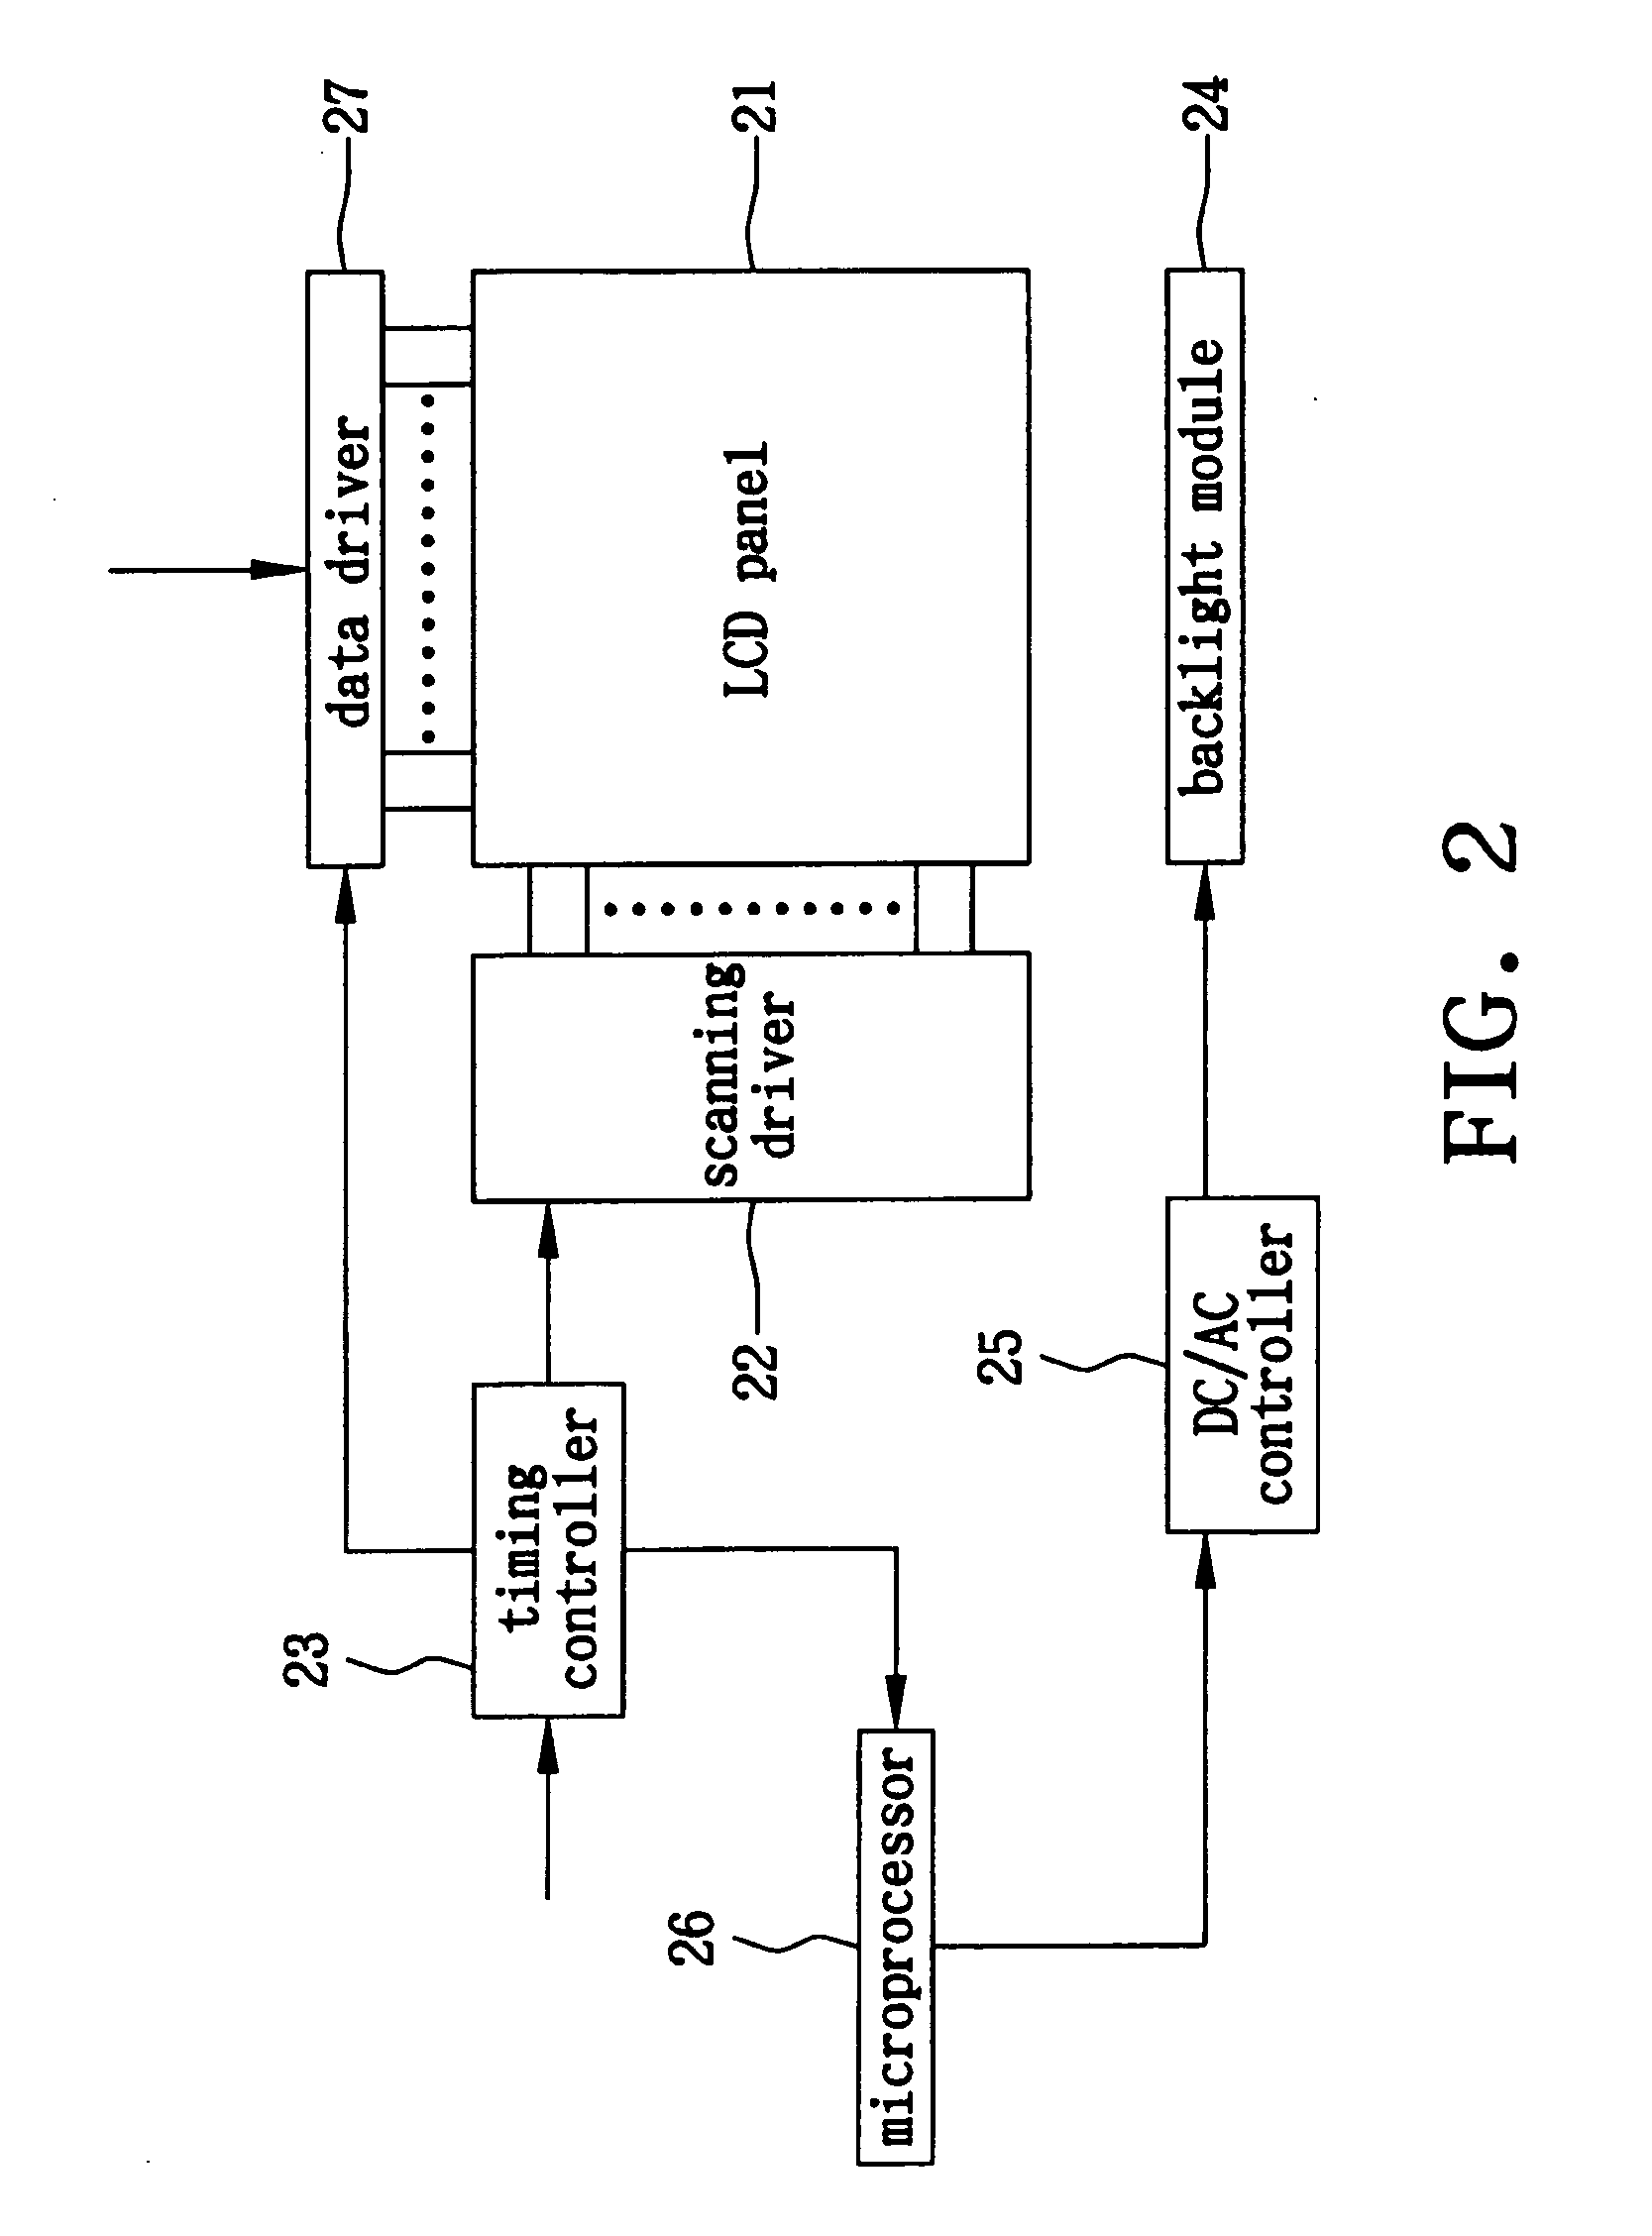 Method for dynamically modulating driving current of backlight module